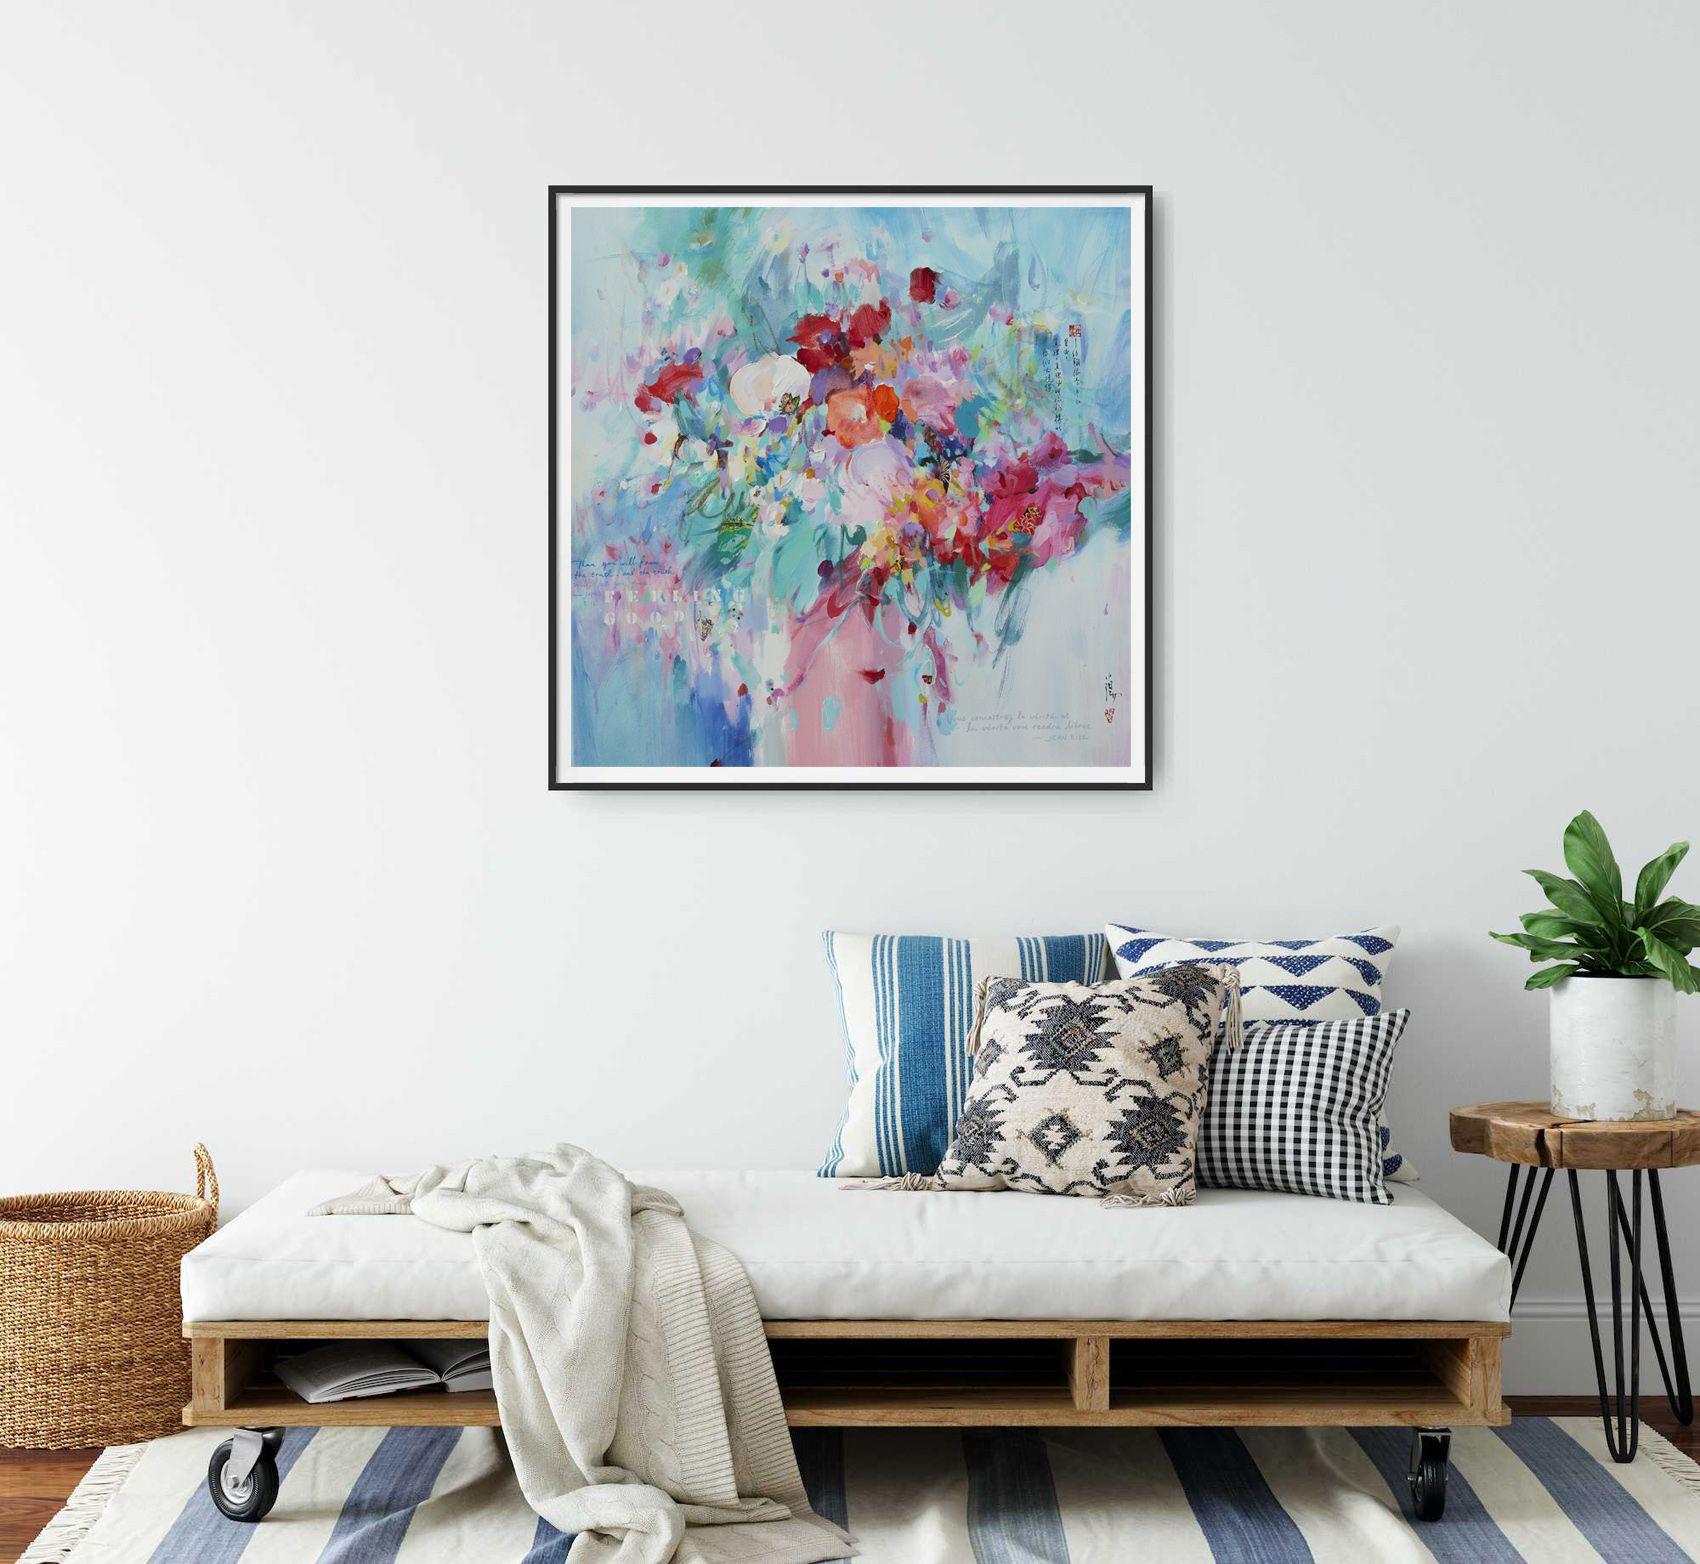 Original sold, private collection. Limited edition art print, signed by the artist, professionally printed on 100% cotton 300g / mÂ² watercolor fine art paper, matte textured finish, which reproduces the colors, tones and details of the original